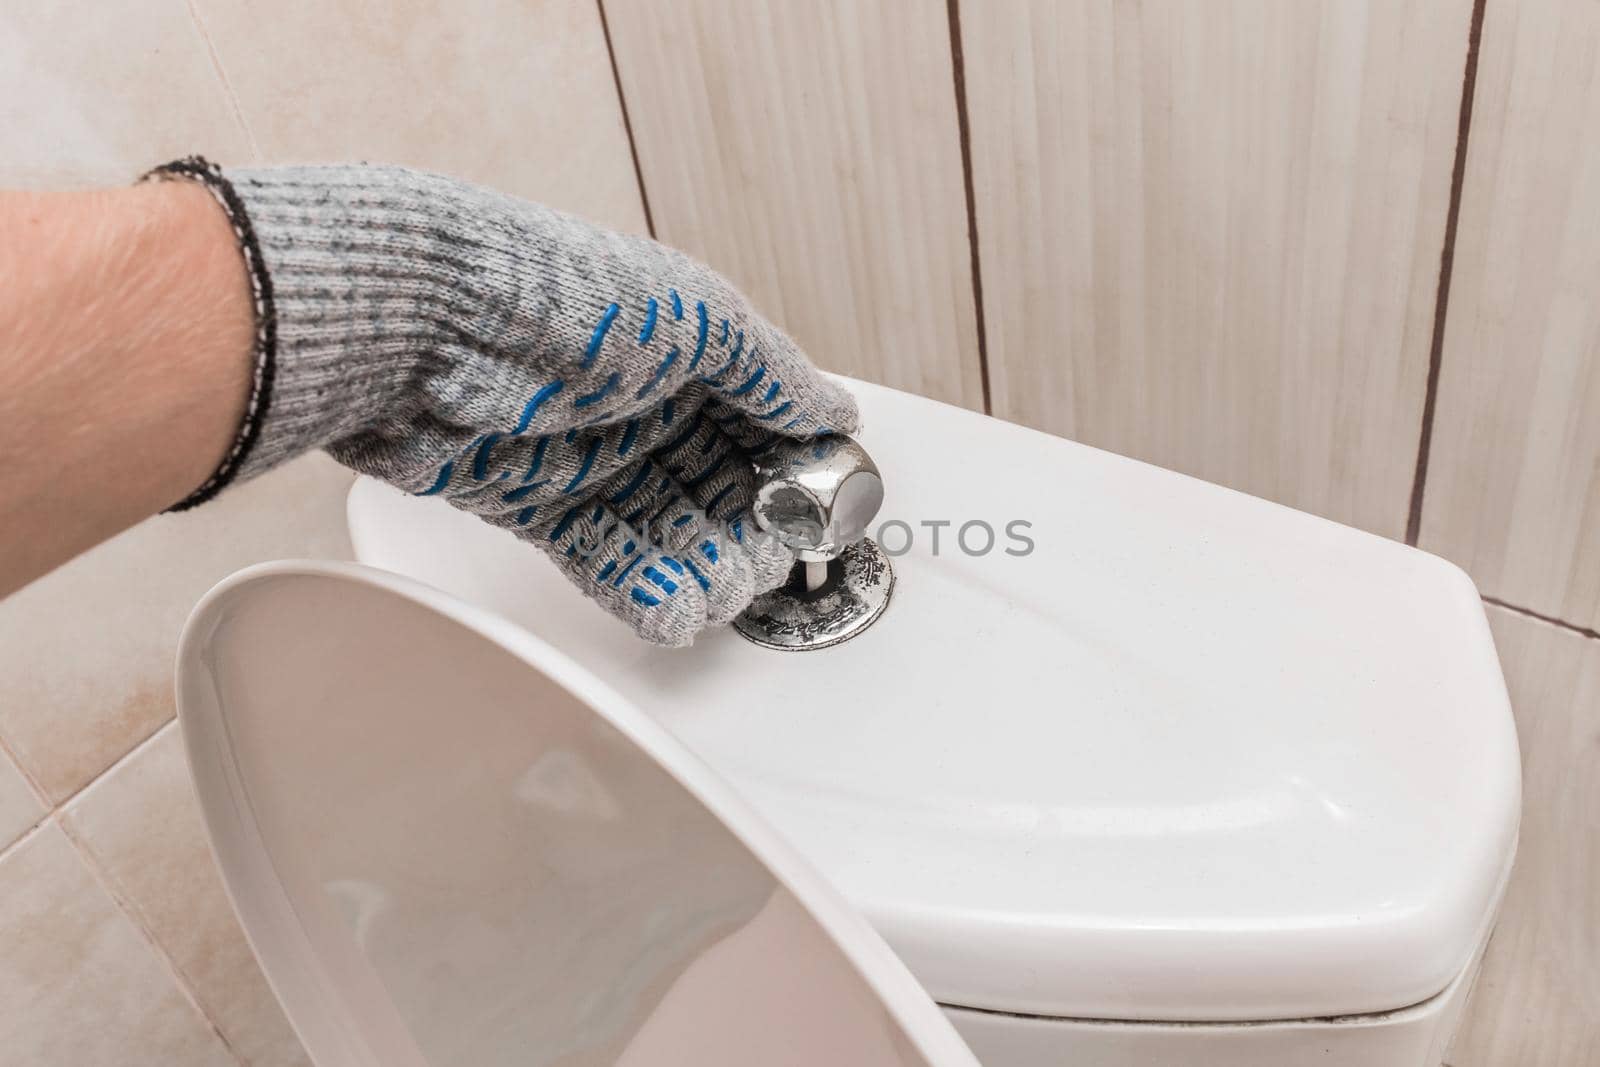 The hand of a plumber in a construction glove checks the serviceability of the toilet barrel. Professional repair of sanitary premises.